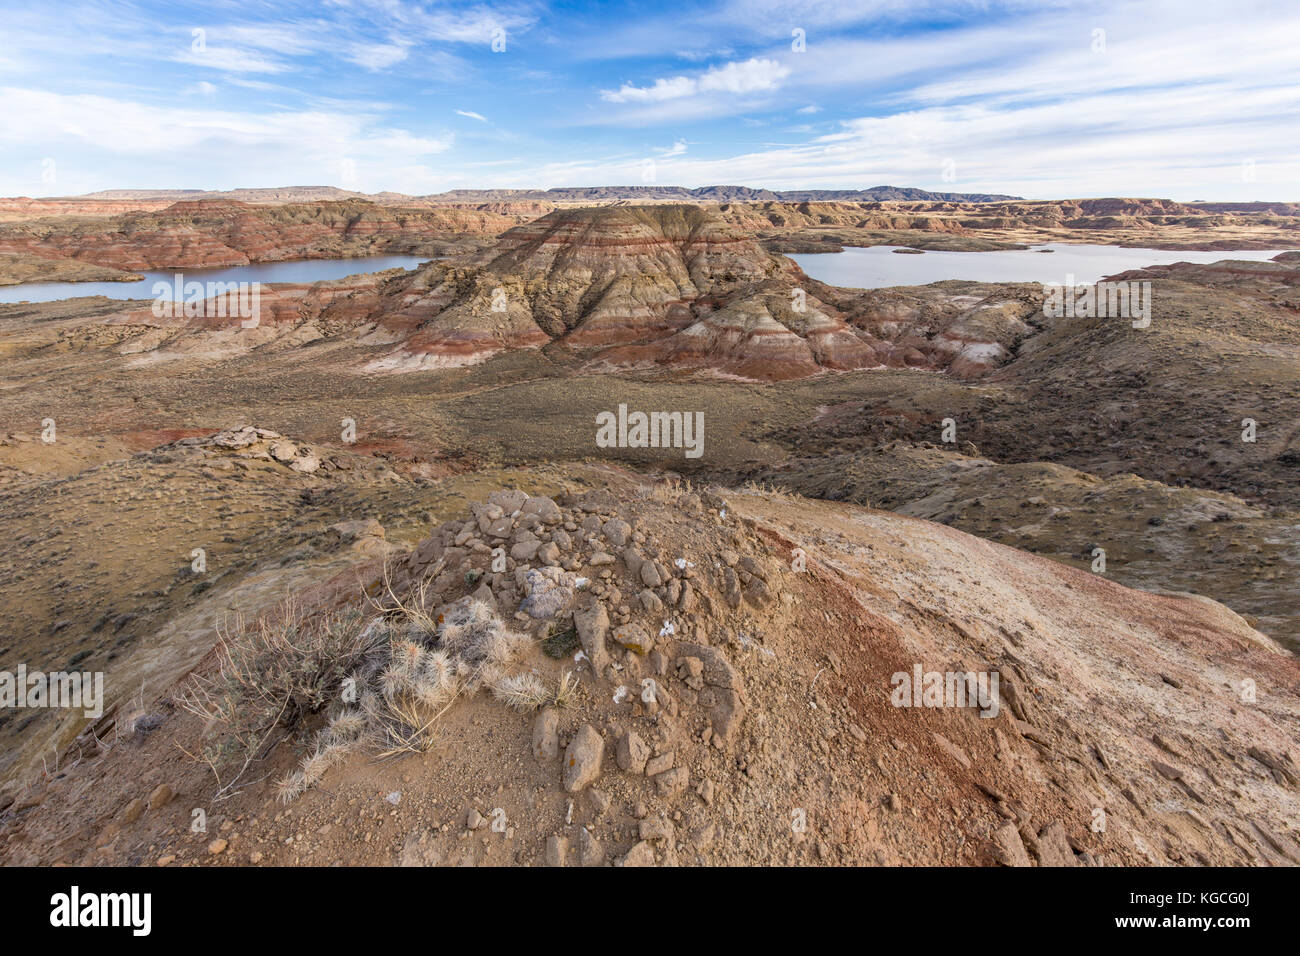 Lake and badlands in the Bighorn Basin of Wyoming Stock Photo